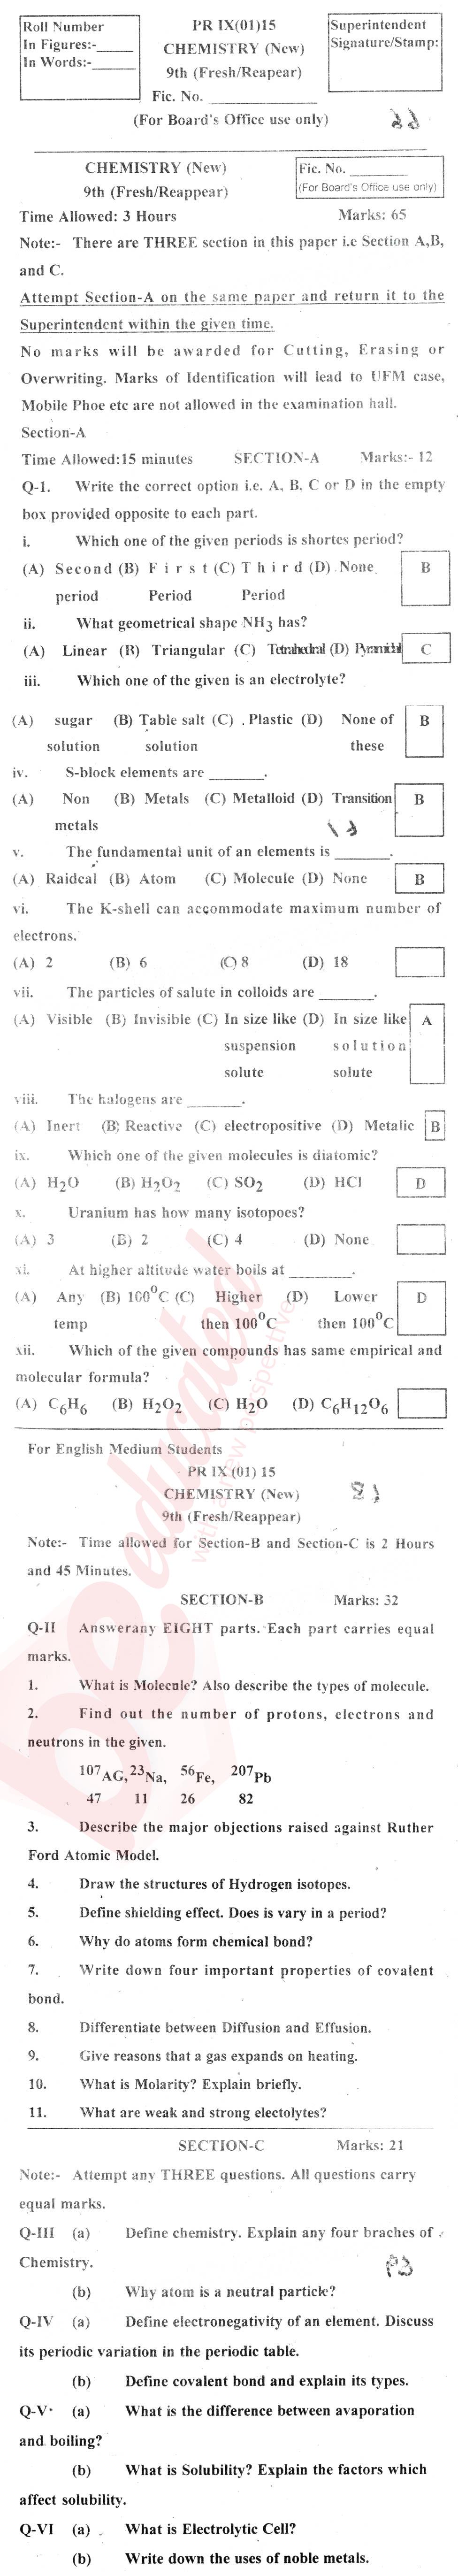 Chemistry 9th English Medium Past Paper Group 1 BISE Bannu 2015